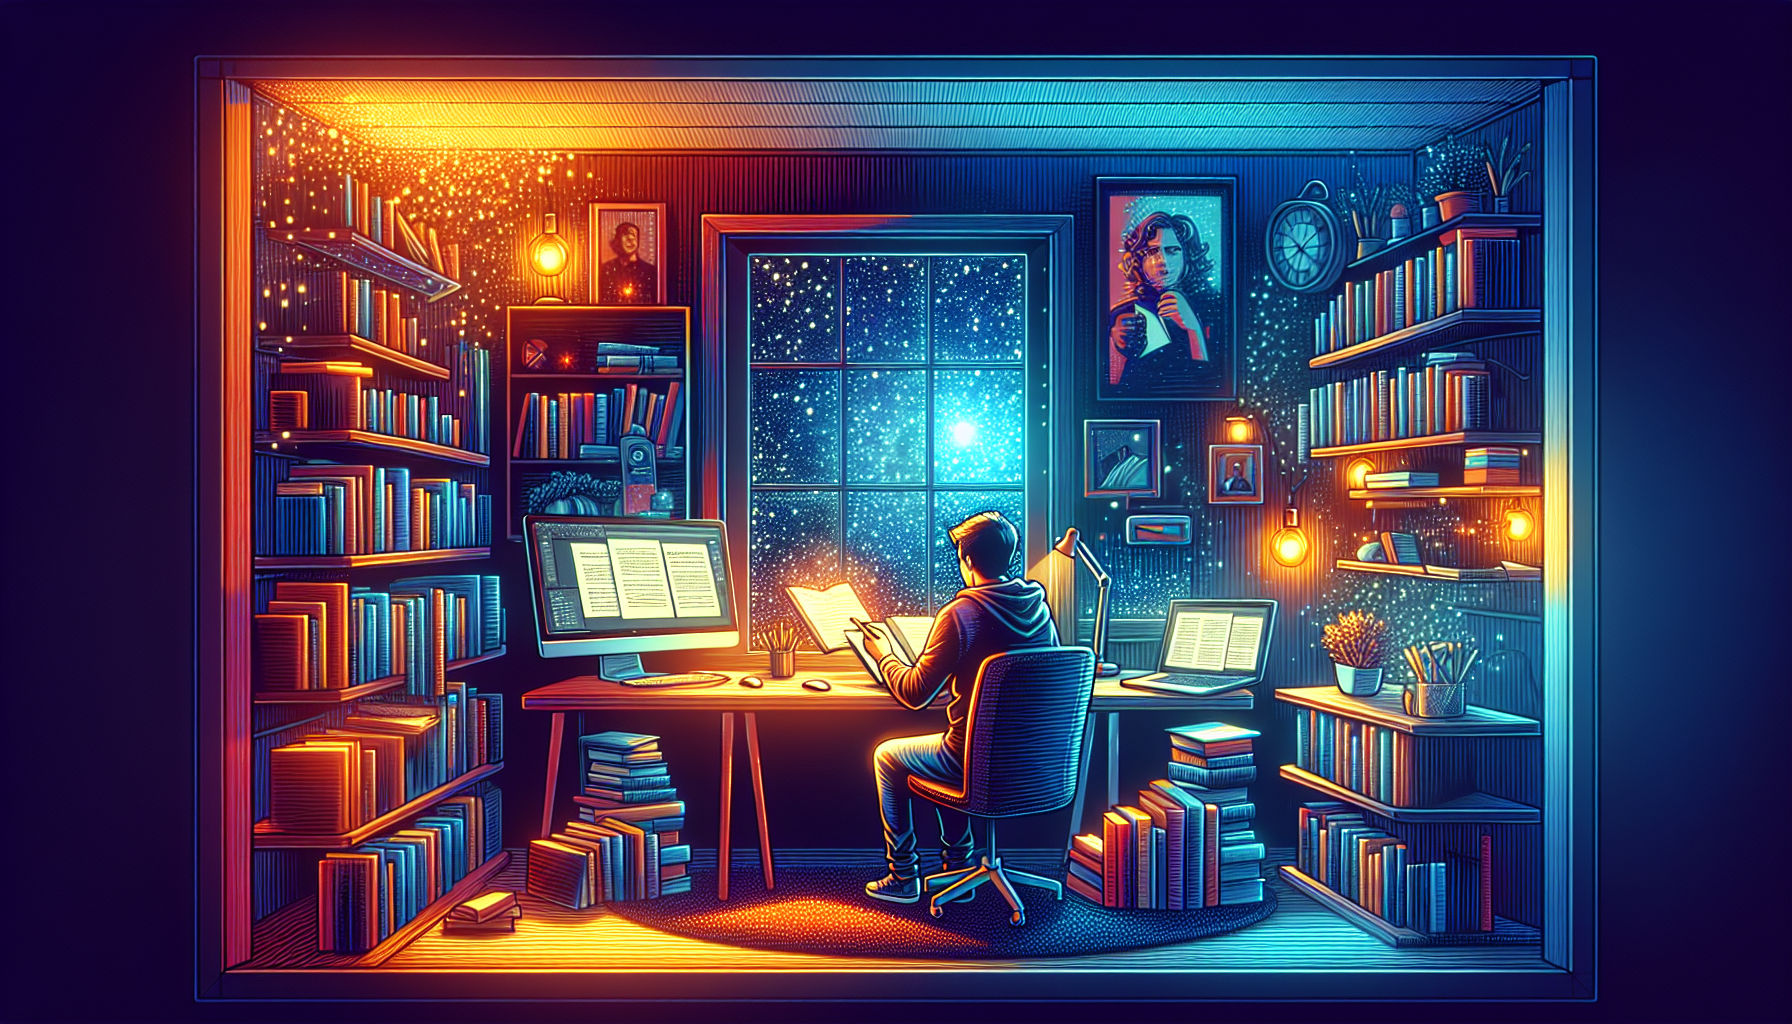 An artistic digital illustration of a cozy study room at night, filled with glowing screens displaying various screenwriting software, surrounded by books on filmmaking and scripts, with a young, insp